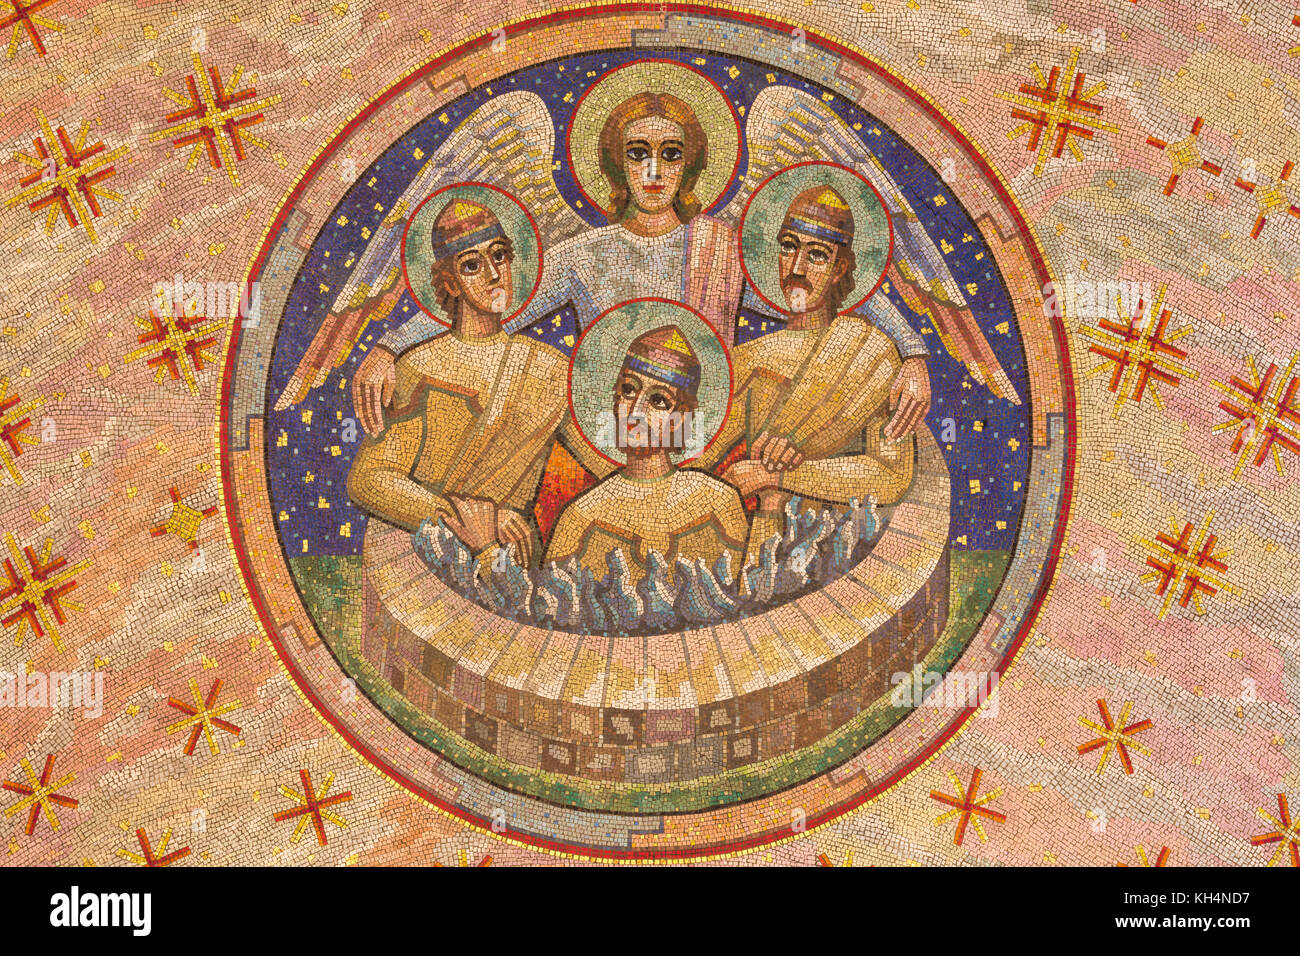 LONDON, GREAT BRITAIN - SEPTEMBER 17, 2017: Mosaic of Shadrach, Meshach, and Abednego in a fiery furnace in Westminster cathedral. Stock Photo